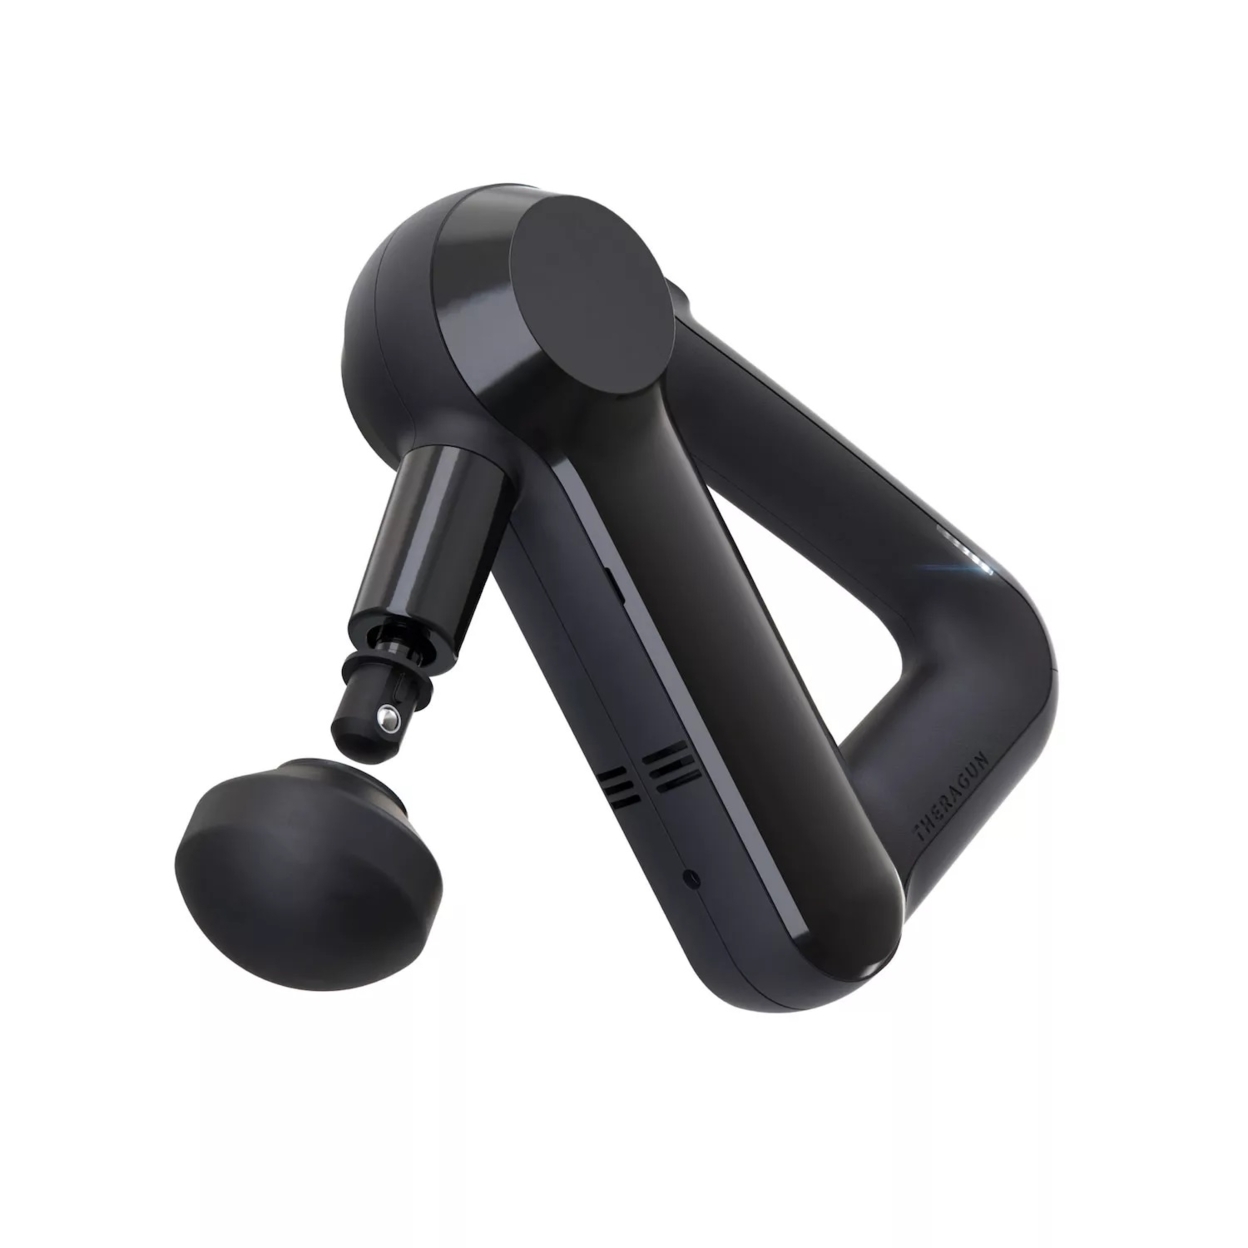 Theragun Black G3 Premium Handheld Percussive Therapy Device, Portable Deep Tissue Massager - image 4 of 6